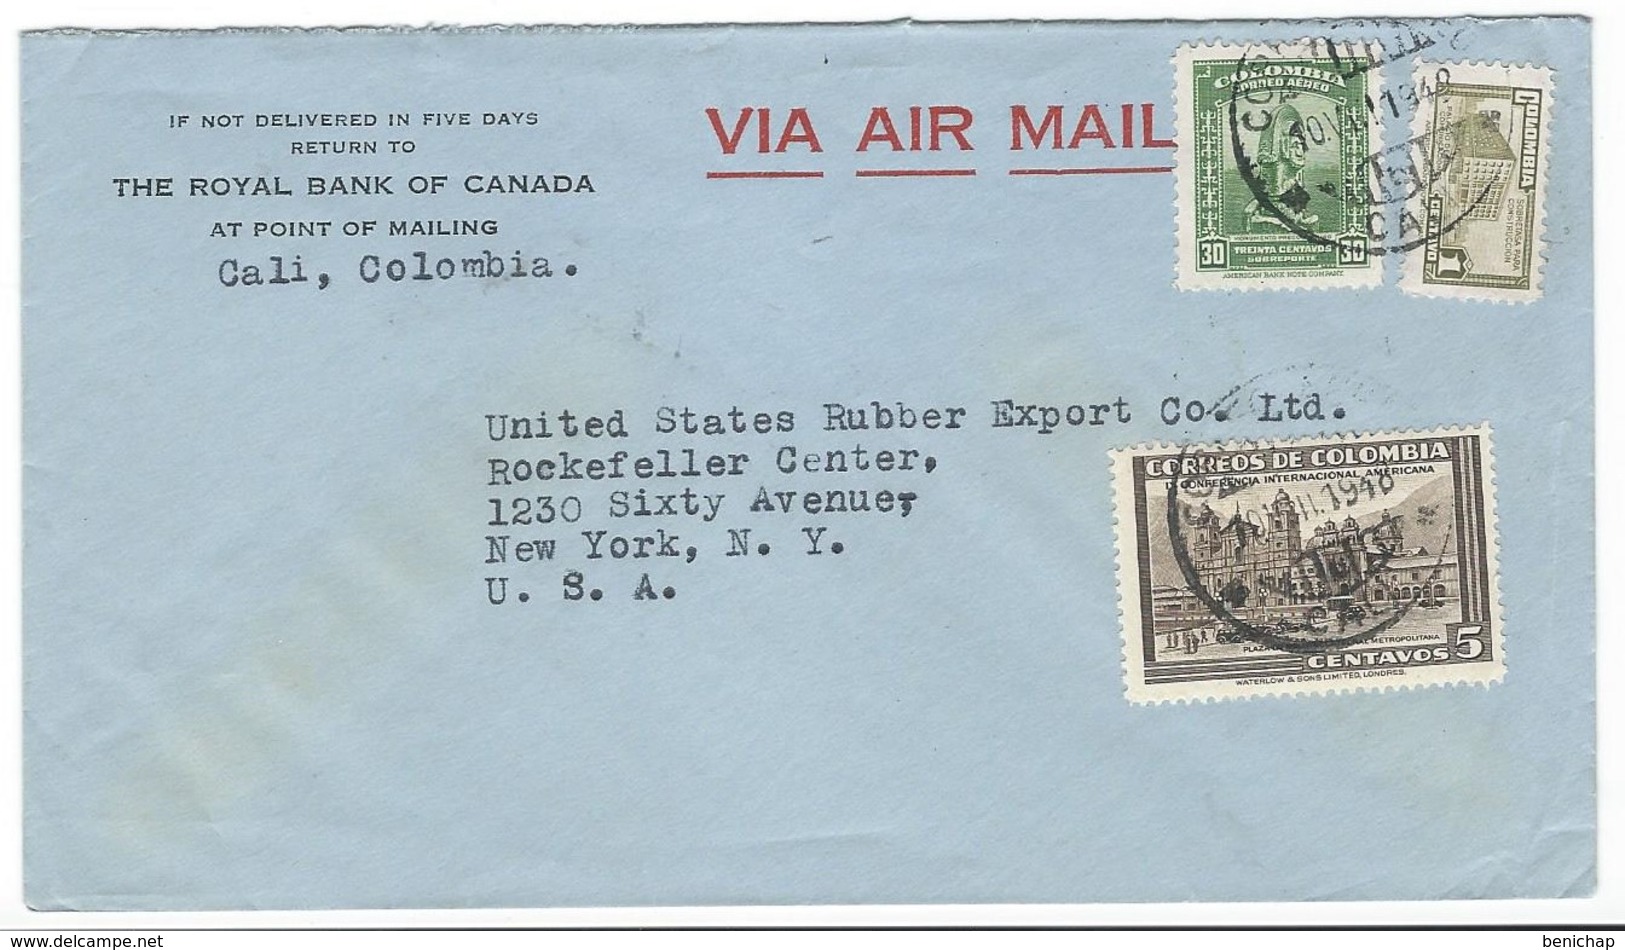 COVER CORREO COLOMBIA - VIA AIR MAIL - CALI - THE ROYAL BANK OF CANADA - ROCKEFELLER CENTER - NEW YORK. - Colombia